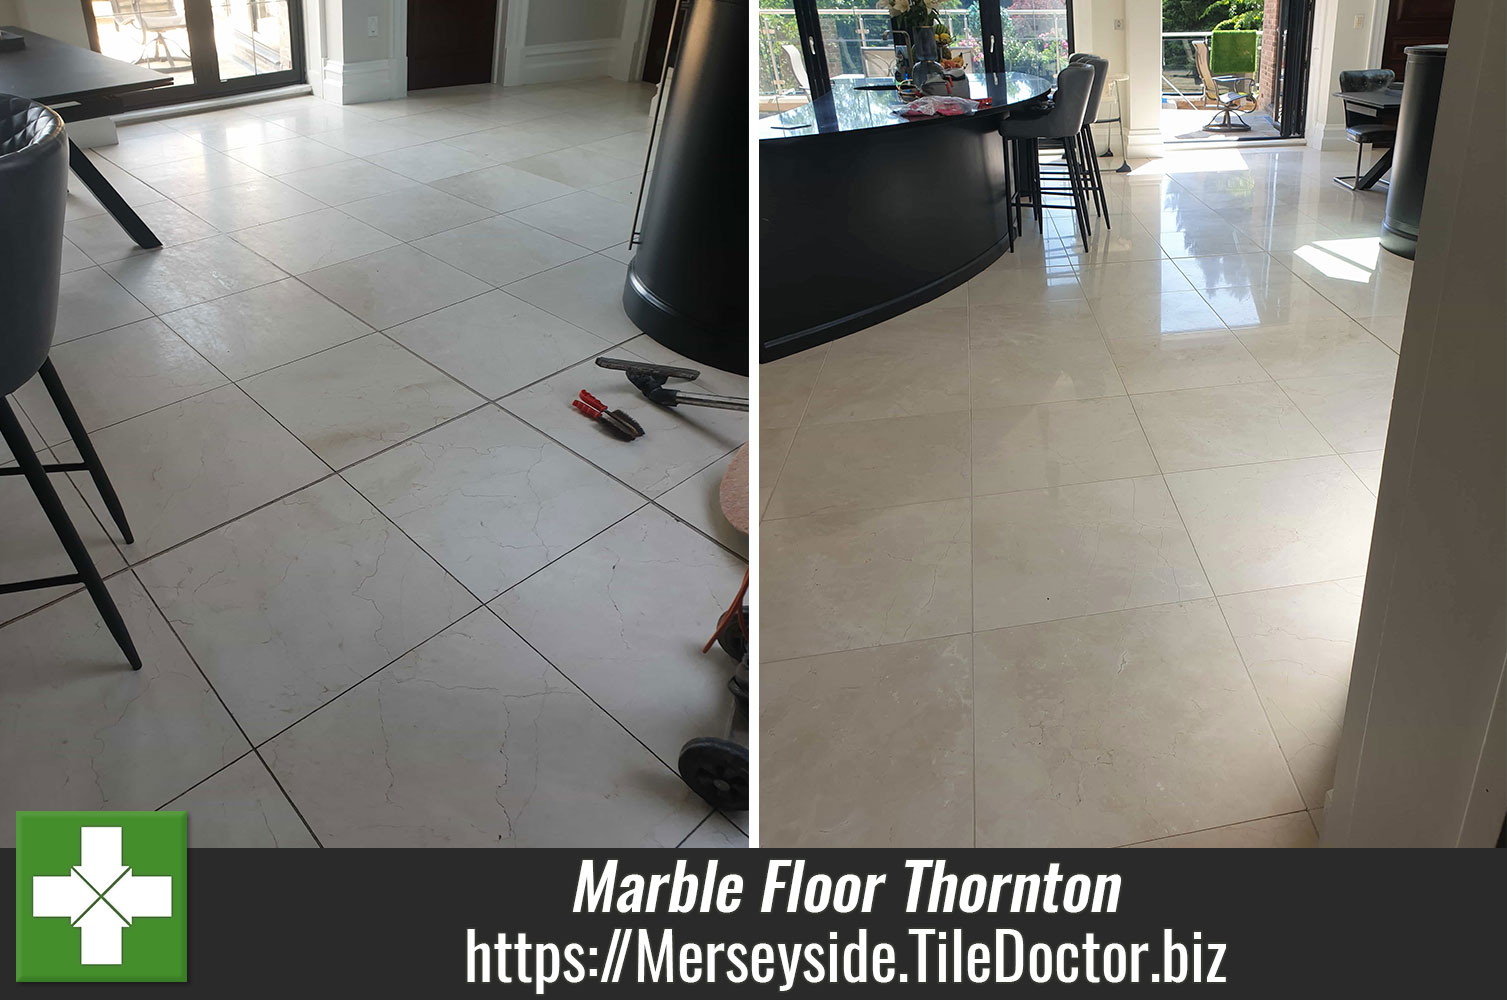 Achieving a Deep Shine on Polished Marble with Tile Doctor Burnishing Pads